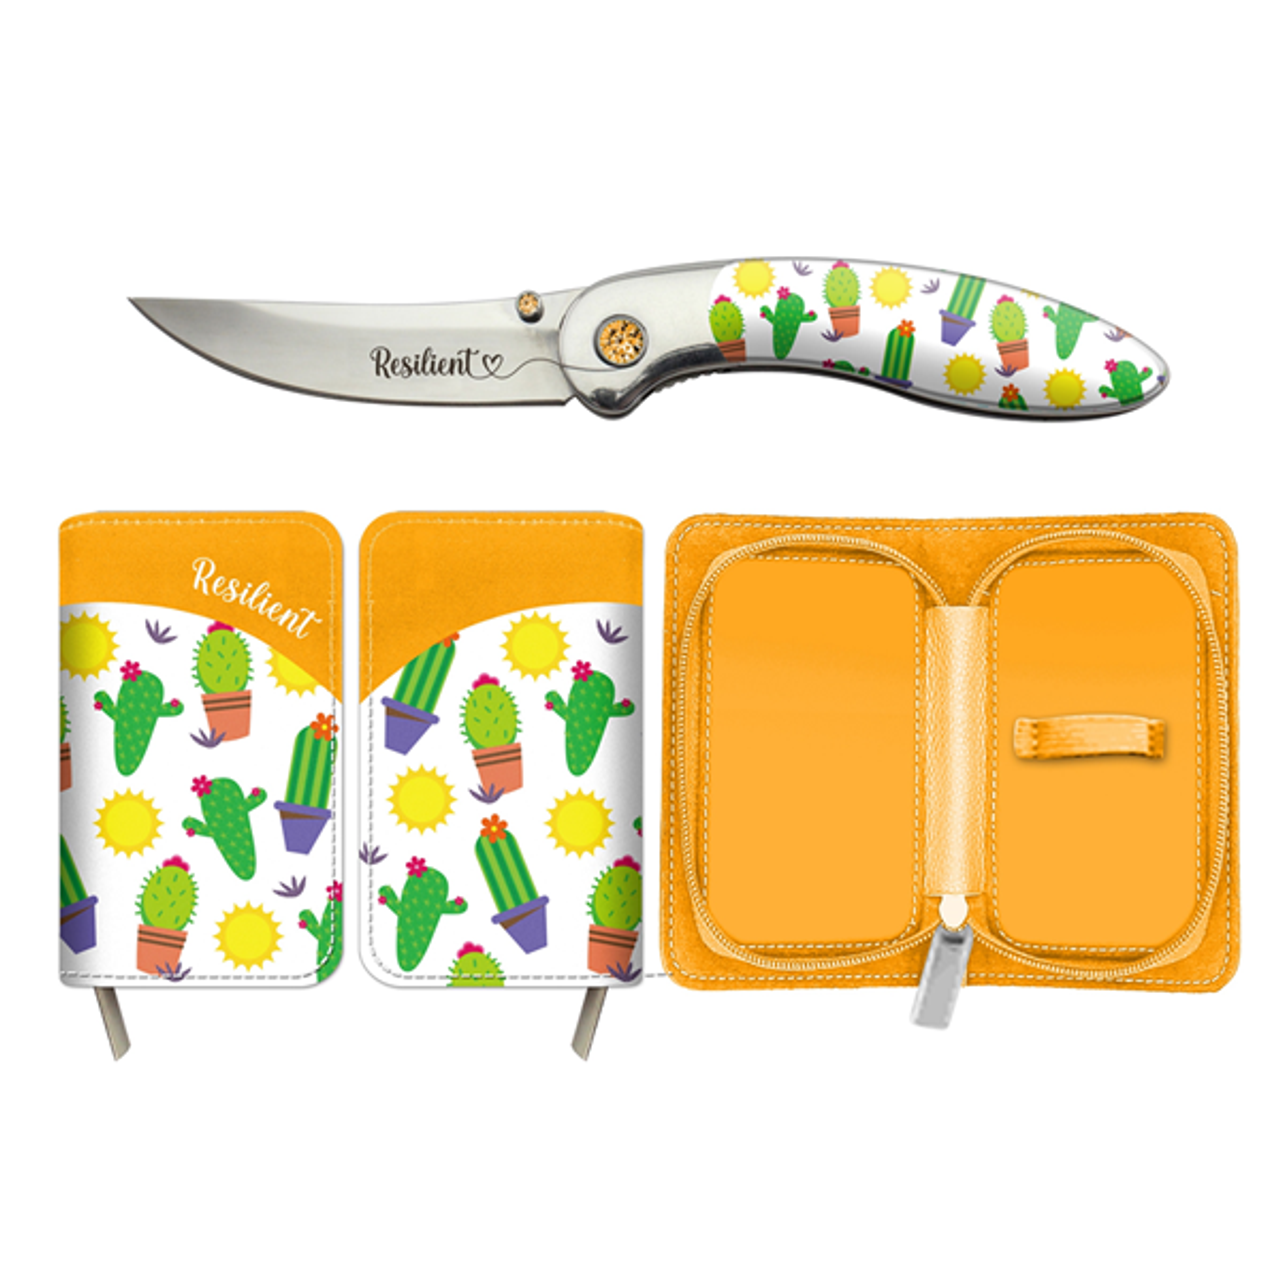 Brighten Blades Resilient Folding Knife (BB006) 2.56 in Mirror 8Cr13MoV Drop Point Blade w/ "Resilient" Blade Etching, Full-Color Cactus Print Handle